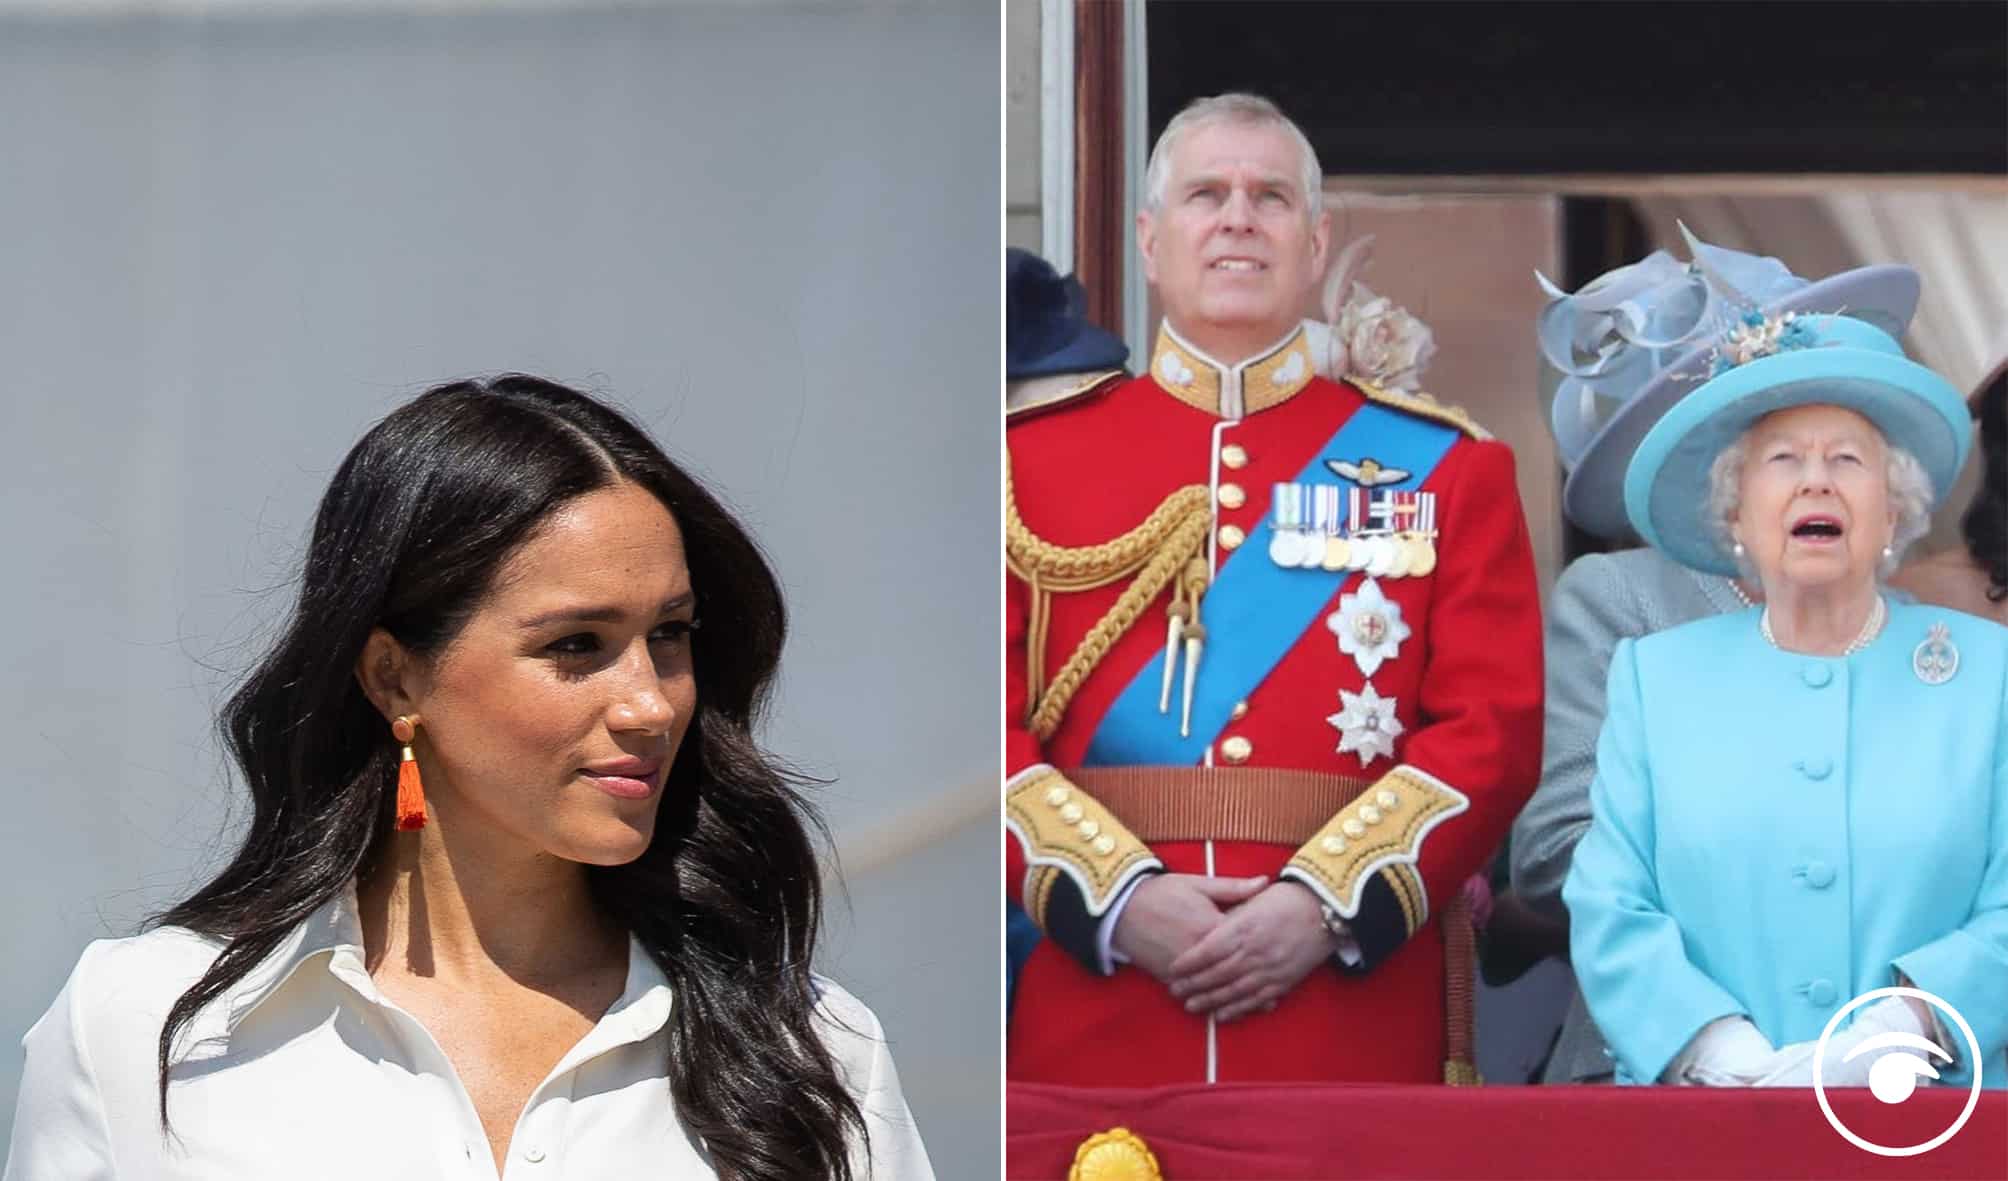 10 best reactions to Royal Family looking to hire a Diversity Tsar